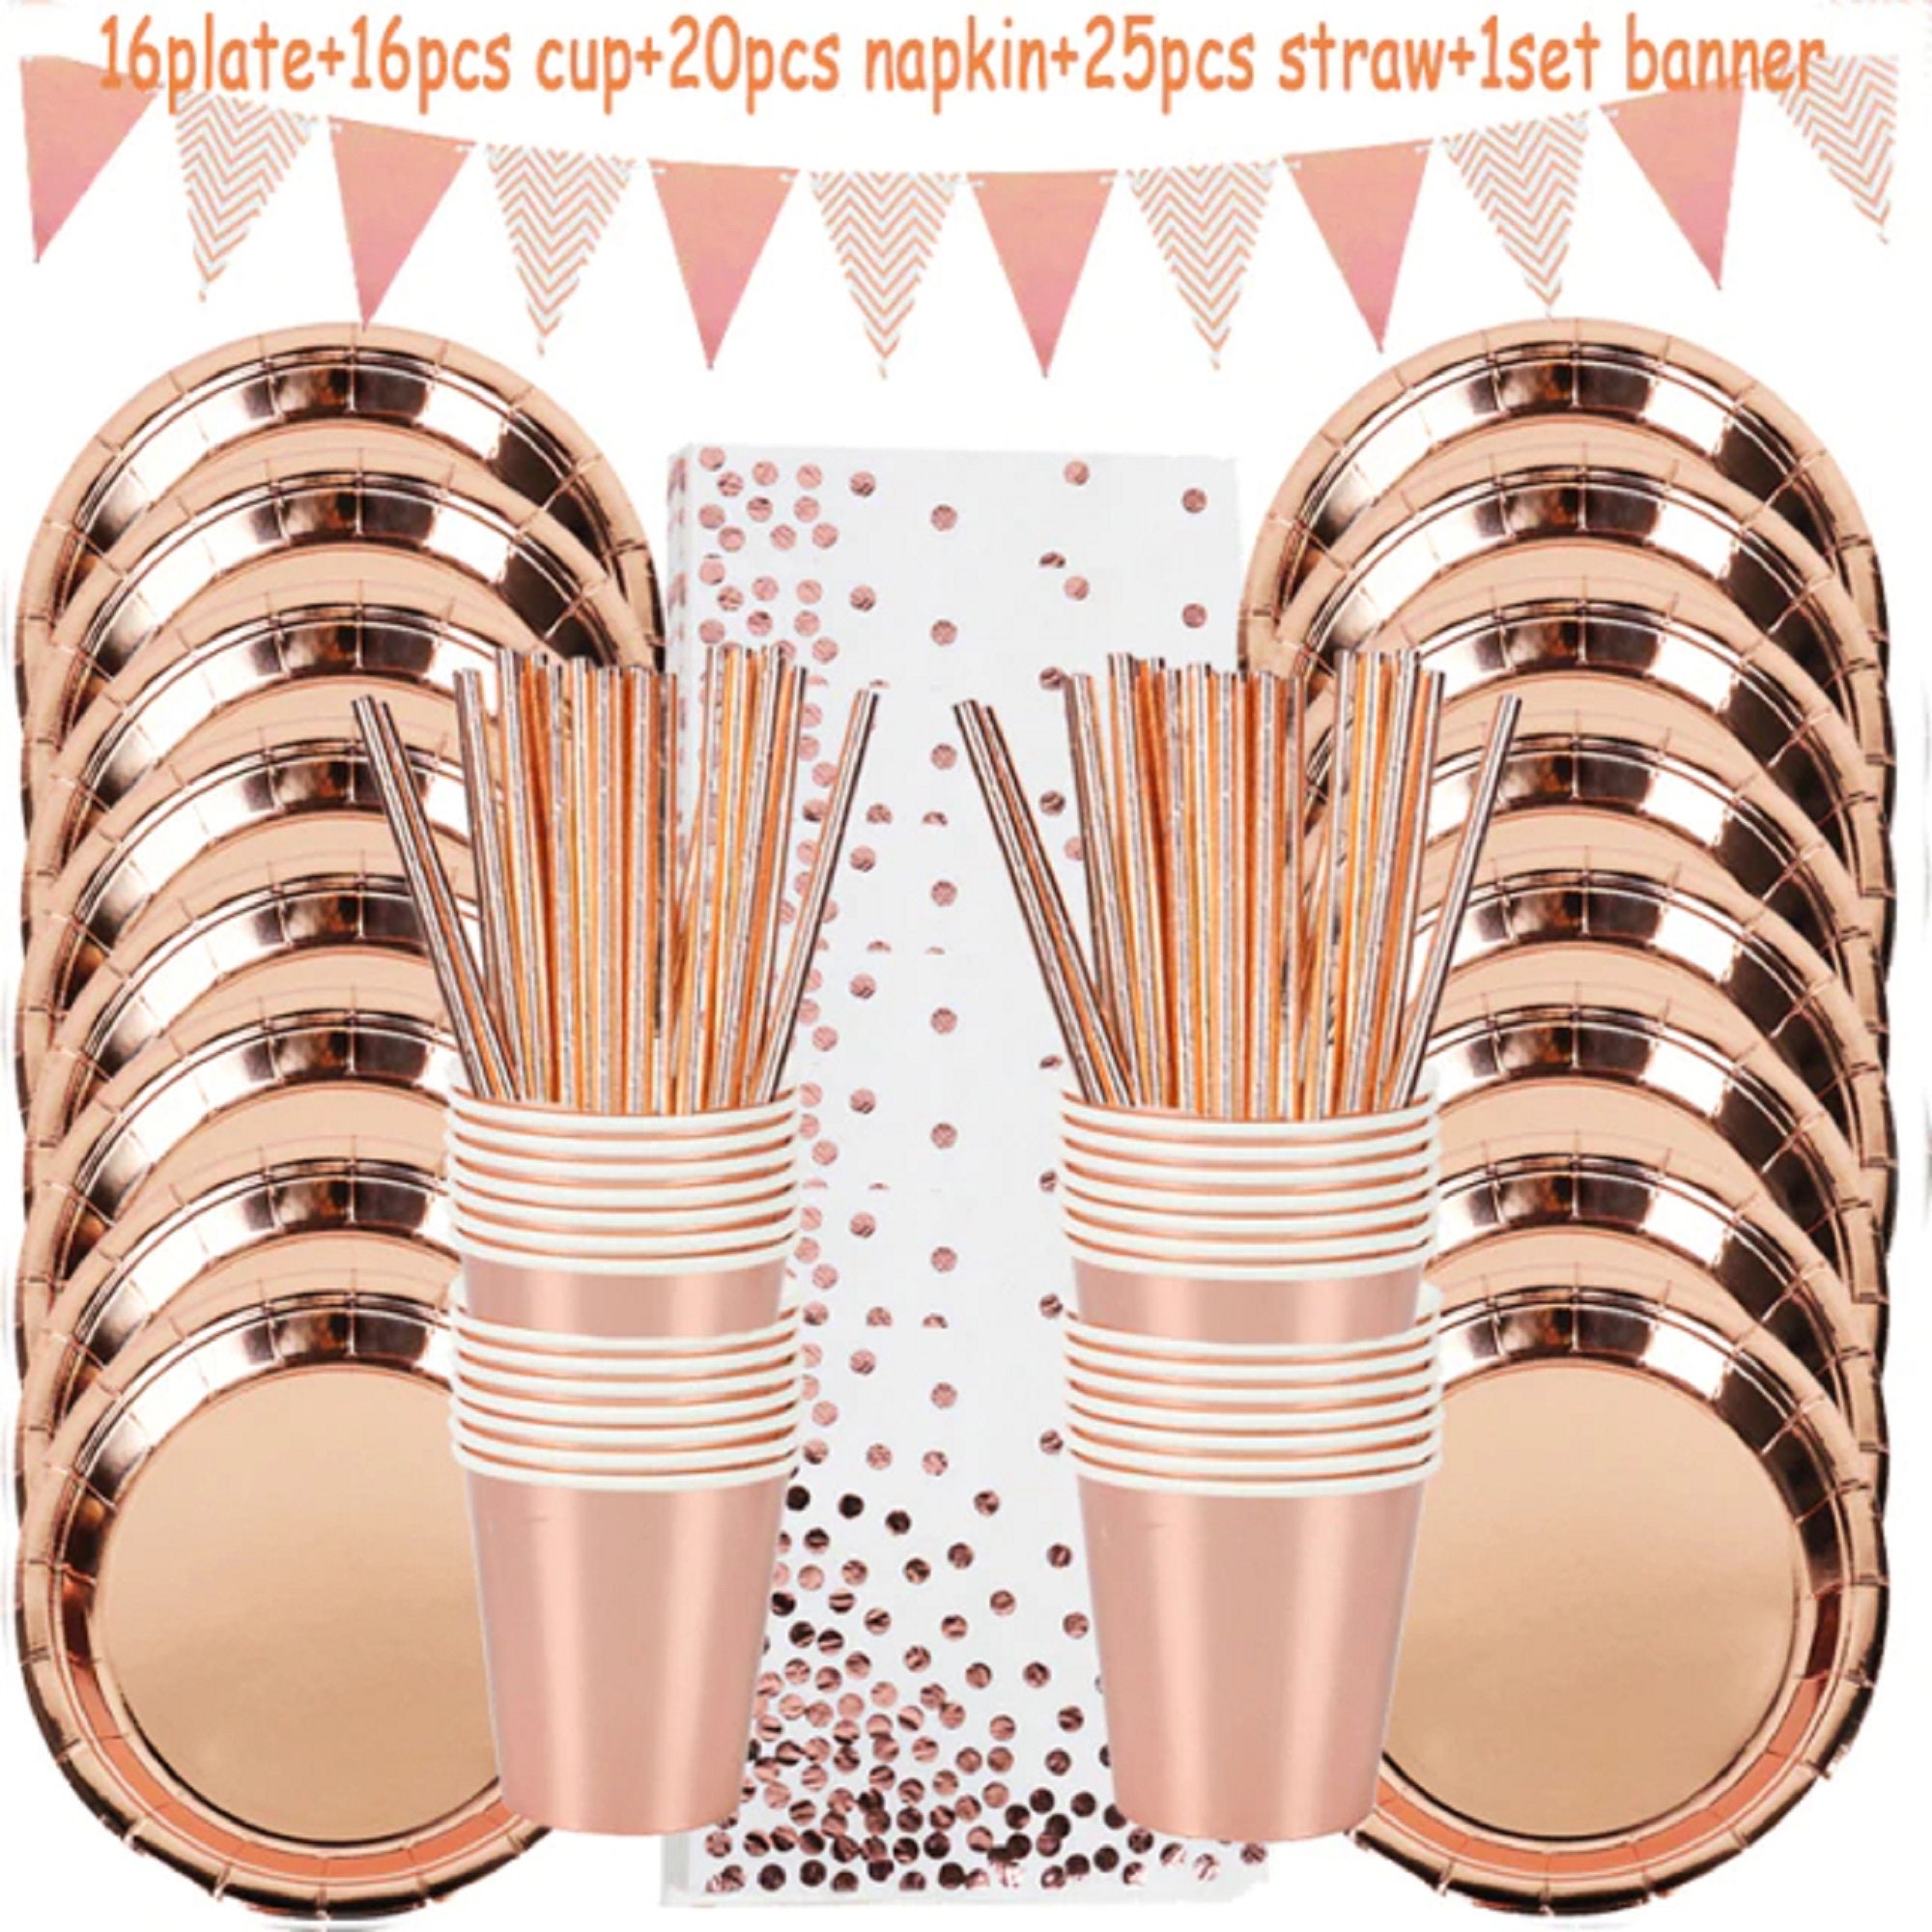 25Spoons for Wedding & Party & Mother’s Day Disposable Rose Gold Rim Plastic Plates include 25Dinner Plates 25Knives 25Forks Ciaell 125PCS Rose Gold Plastic Plates 25Dessert Plates 